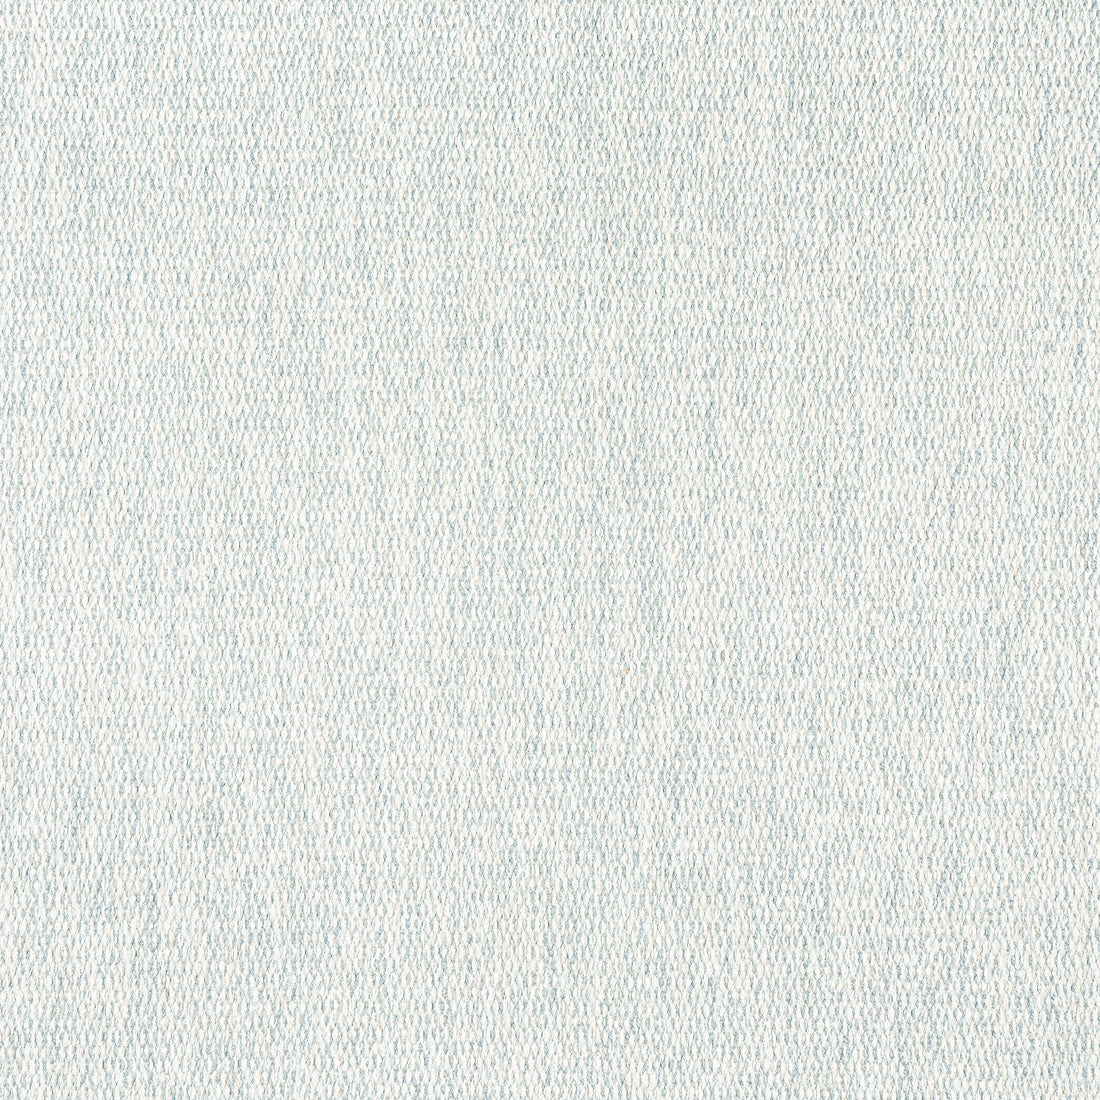 Arroyo fabric in glacier color - pattern number W8785 - by Thibaut in the Haven Textures collection